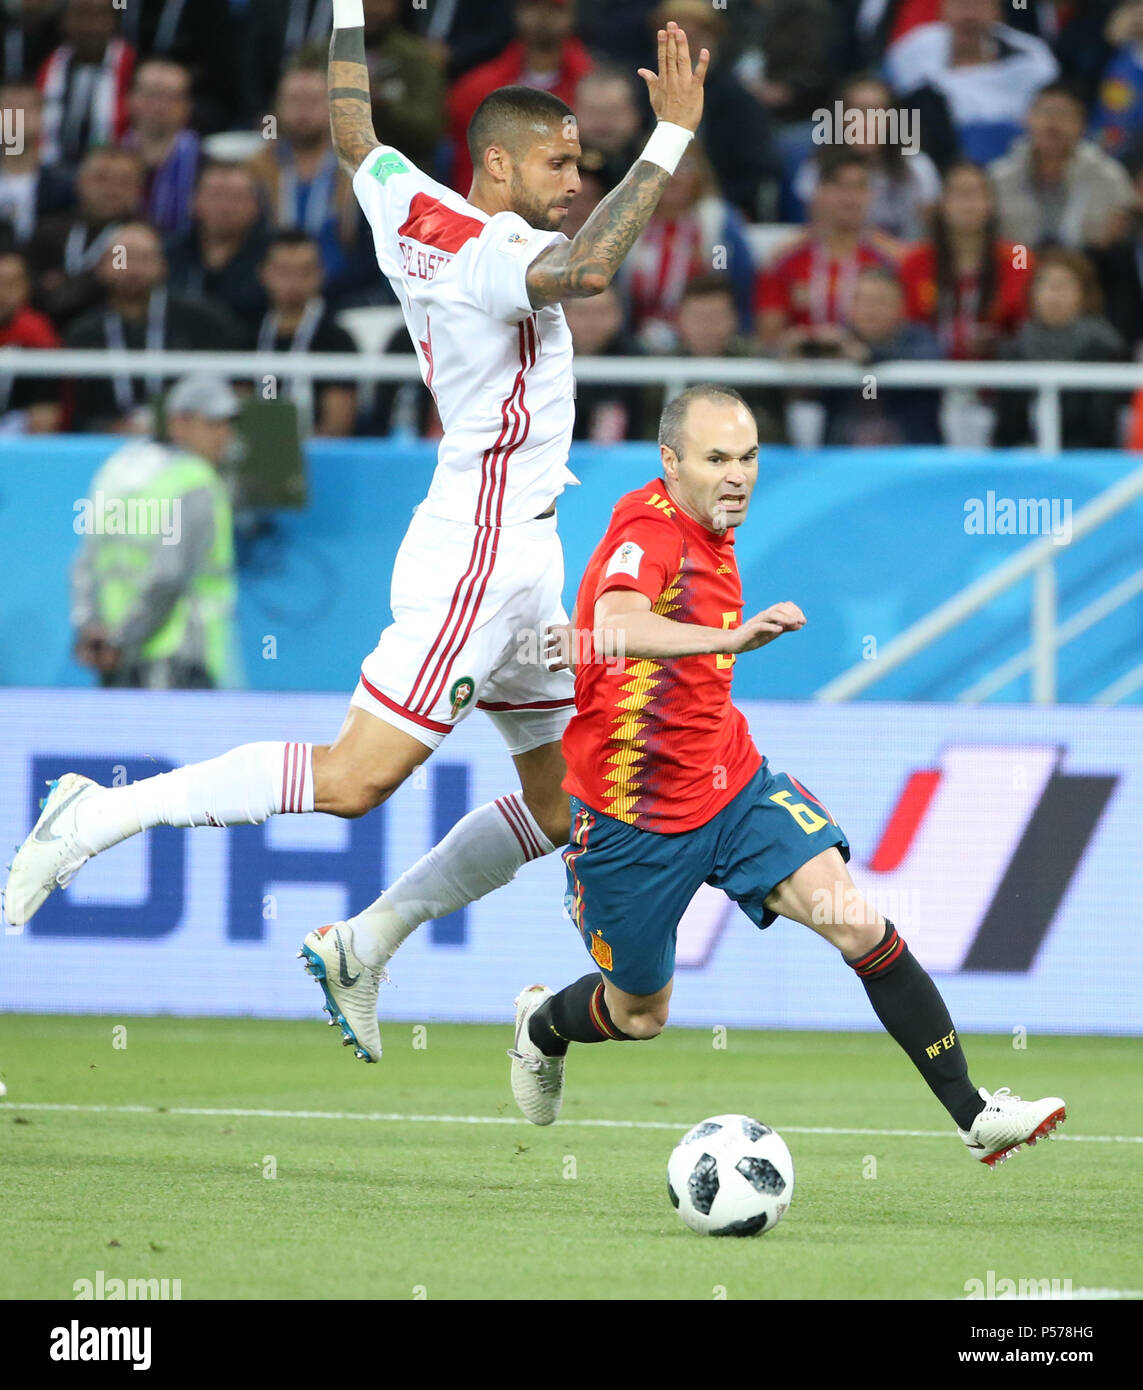 Kaliningrad, Russia. 25th June, 2018. Andres Iniesta (R) of Spain breaks through with the ball during the 2018 FIFA World Cup Group B match between Spain and Morocco in Kaliningrad, Russia, June 25, 2018. Credit: Li Ming/Xinhua/Alamy Live News Stock Photo